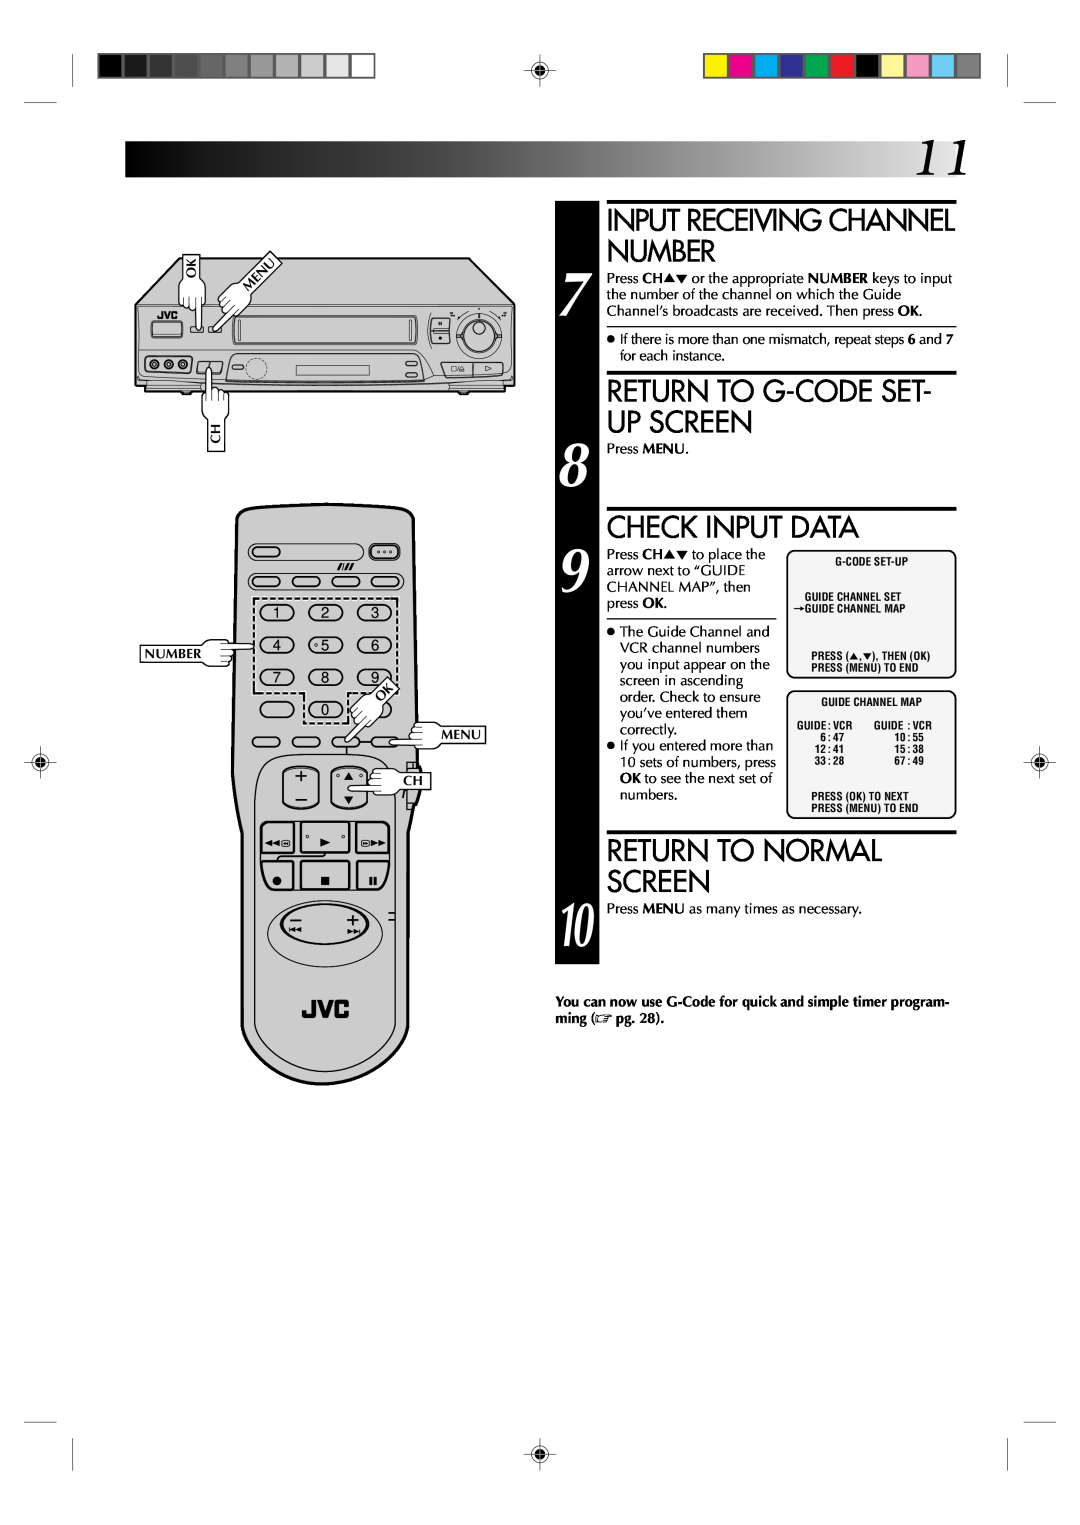 JVC HR-J631T manual Number, Return To G-Code Set Up Screen, Return To Normal, Check Input Data, Input Receiving Channel 